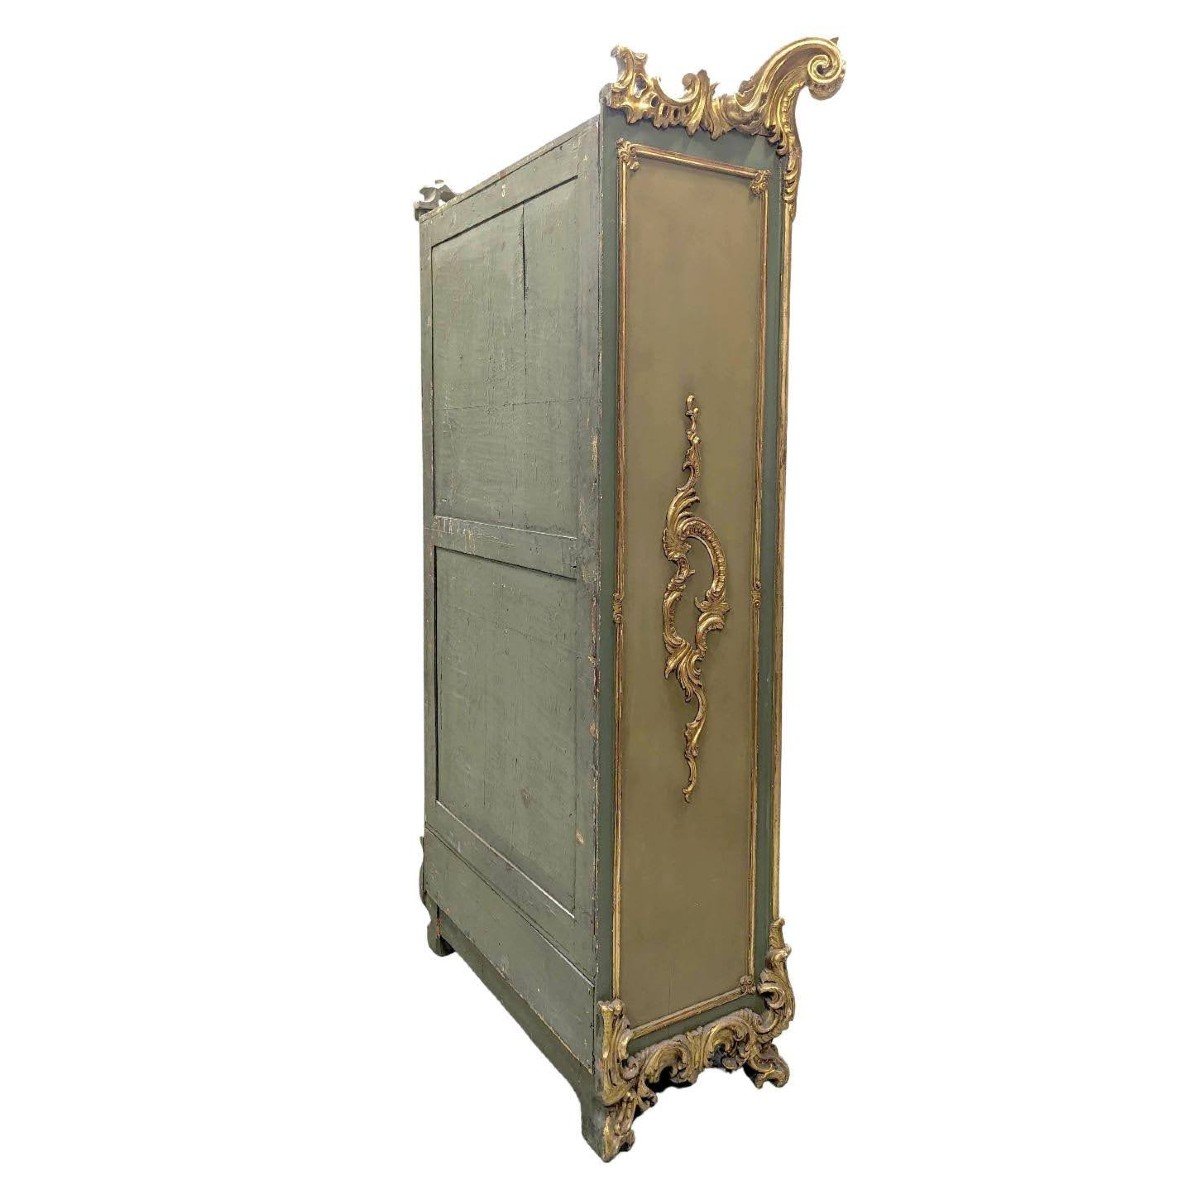 Pair Of Golden Lacquered Turinese Cabinets From The Beginning Of The Nineteenth Century.-photo-2